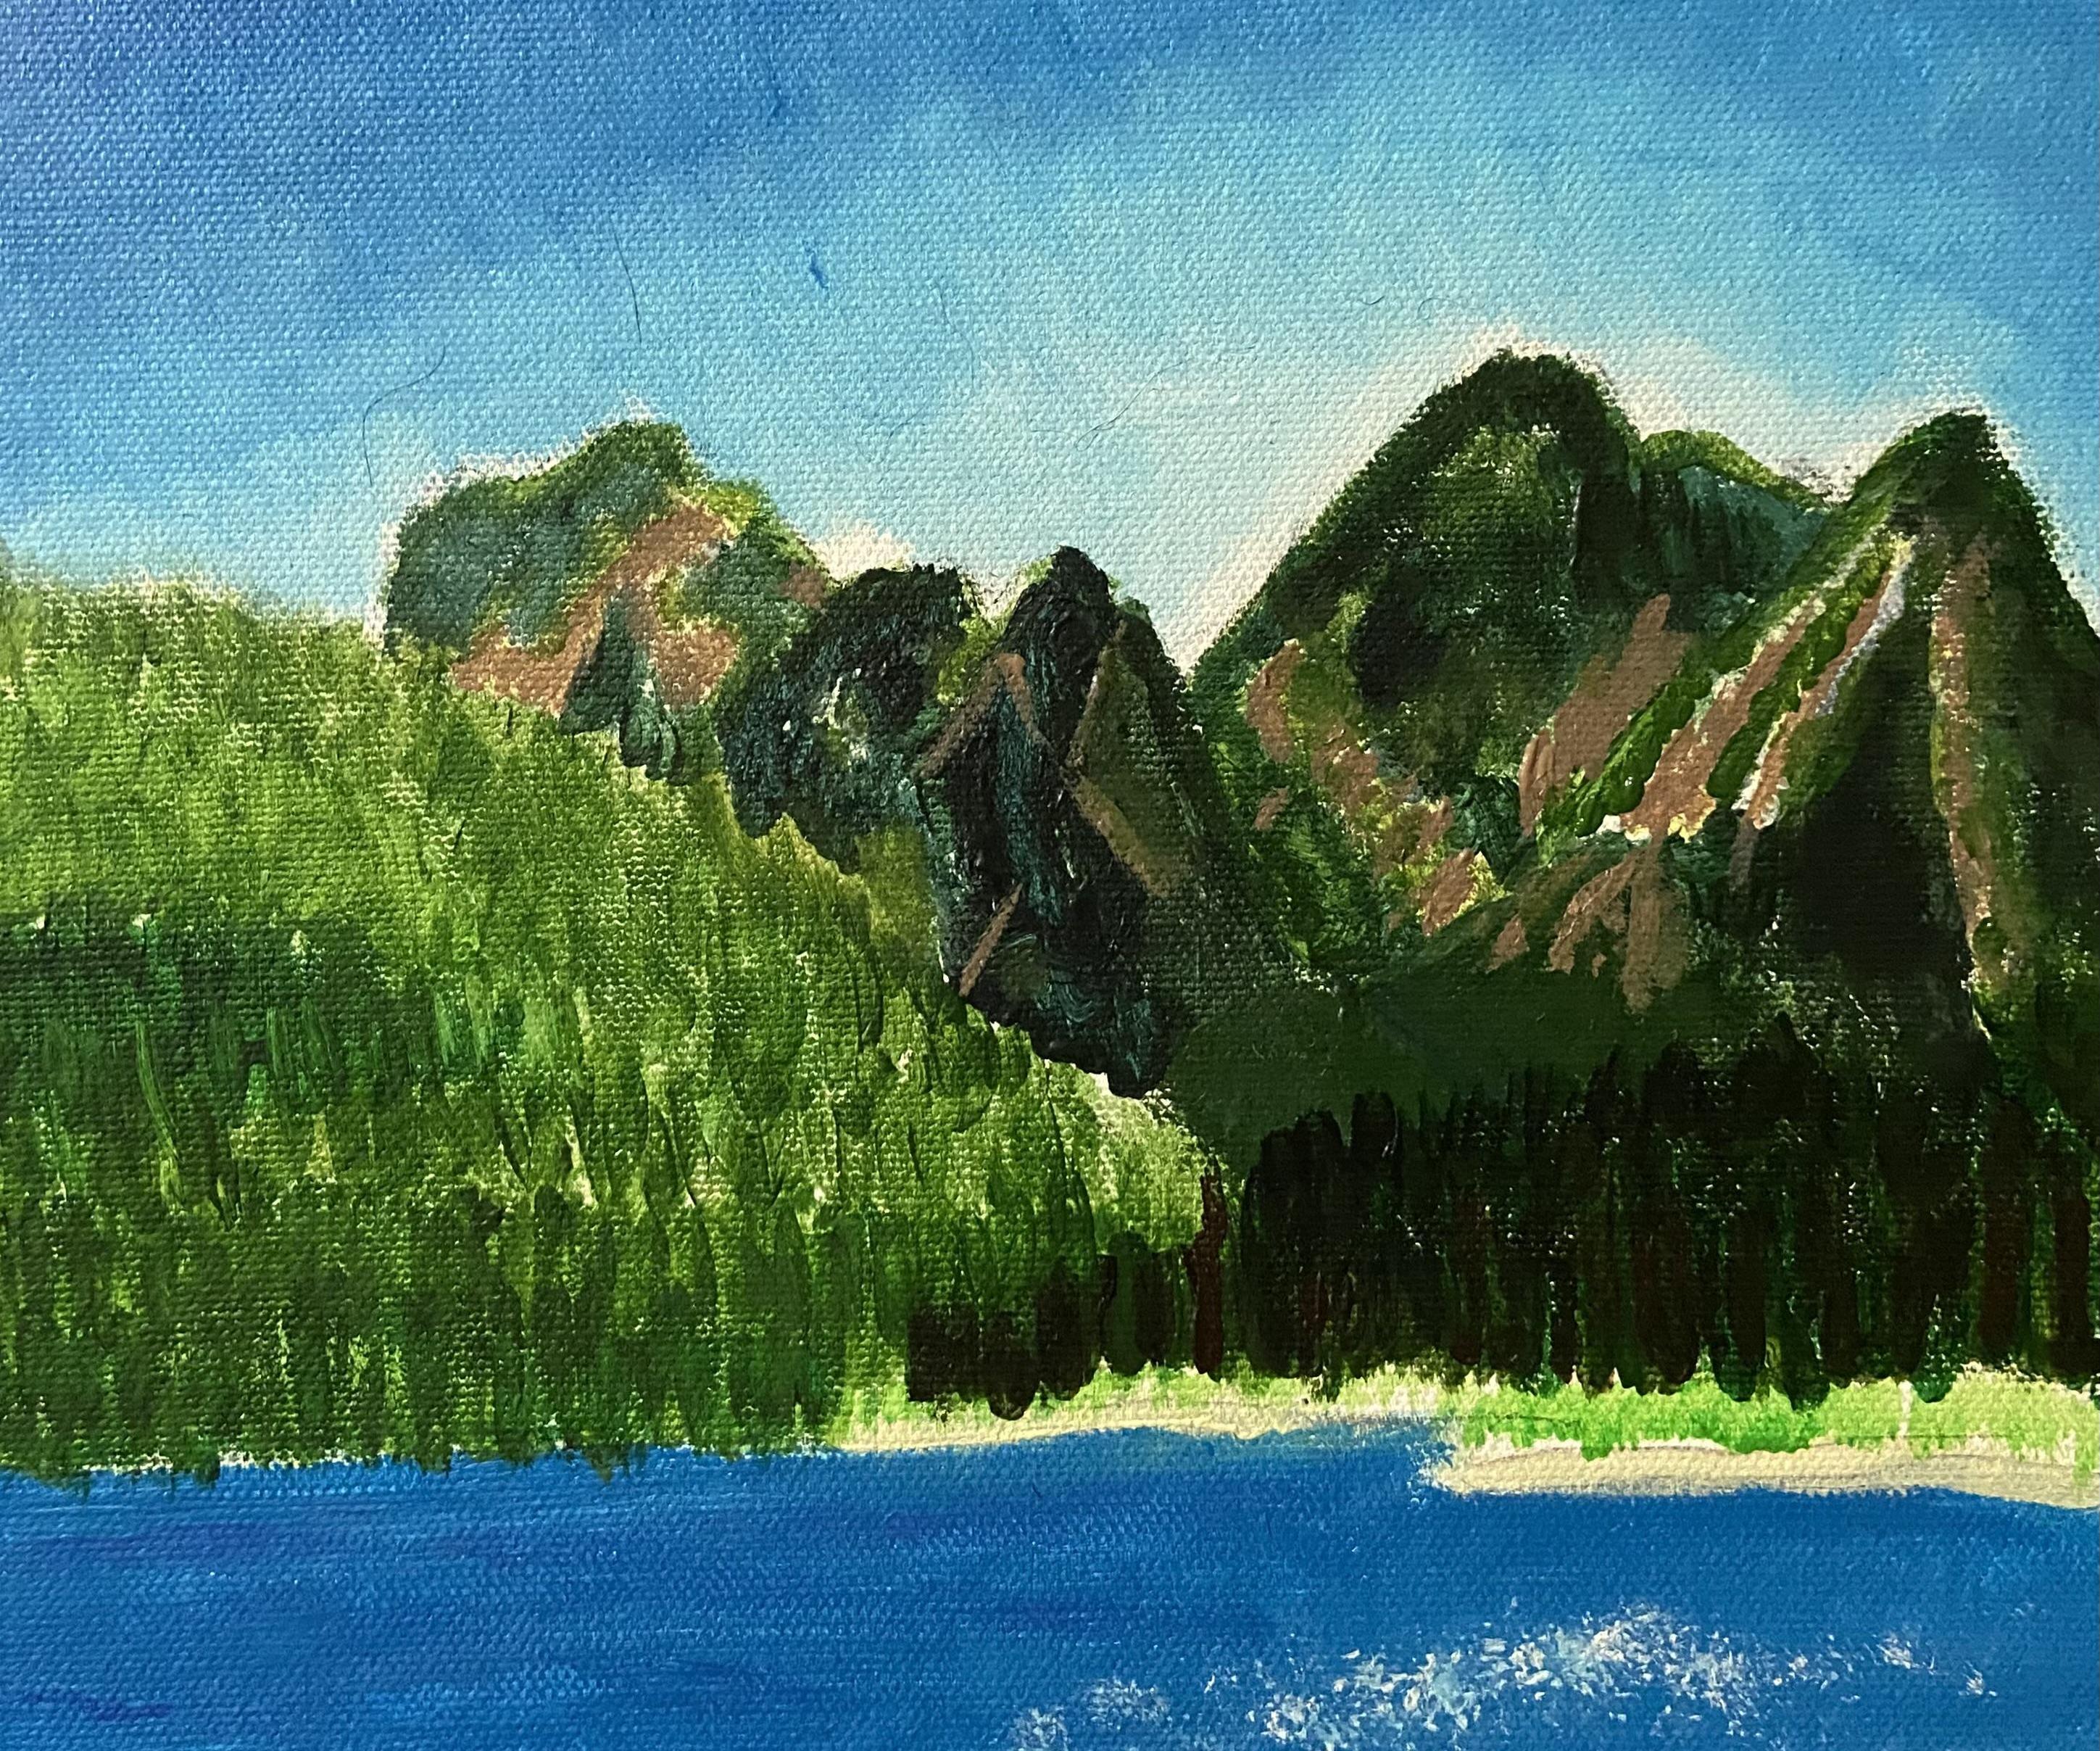 Painting a Mountain Range in Acrylic Paint